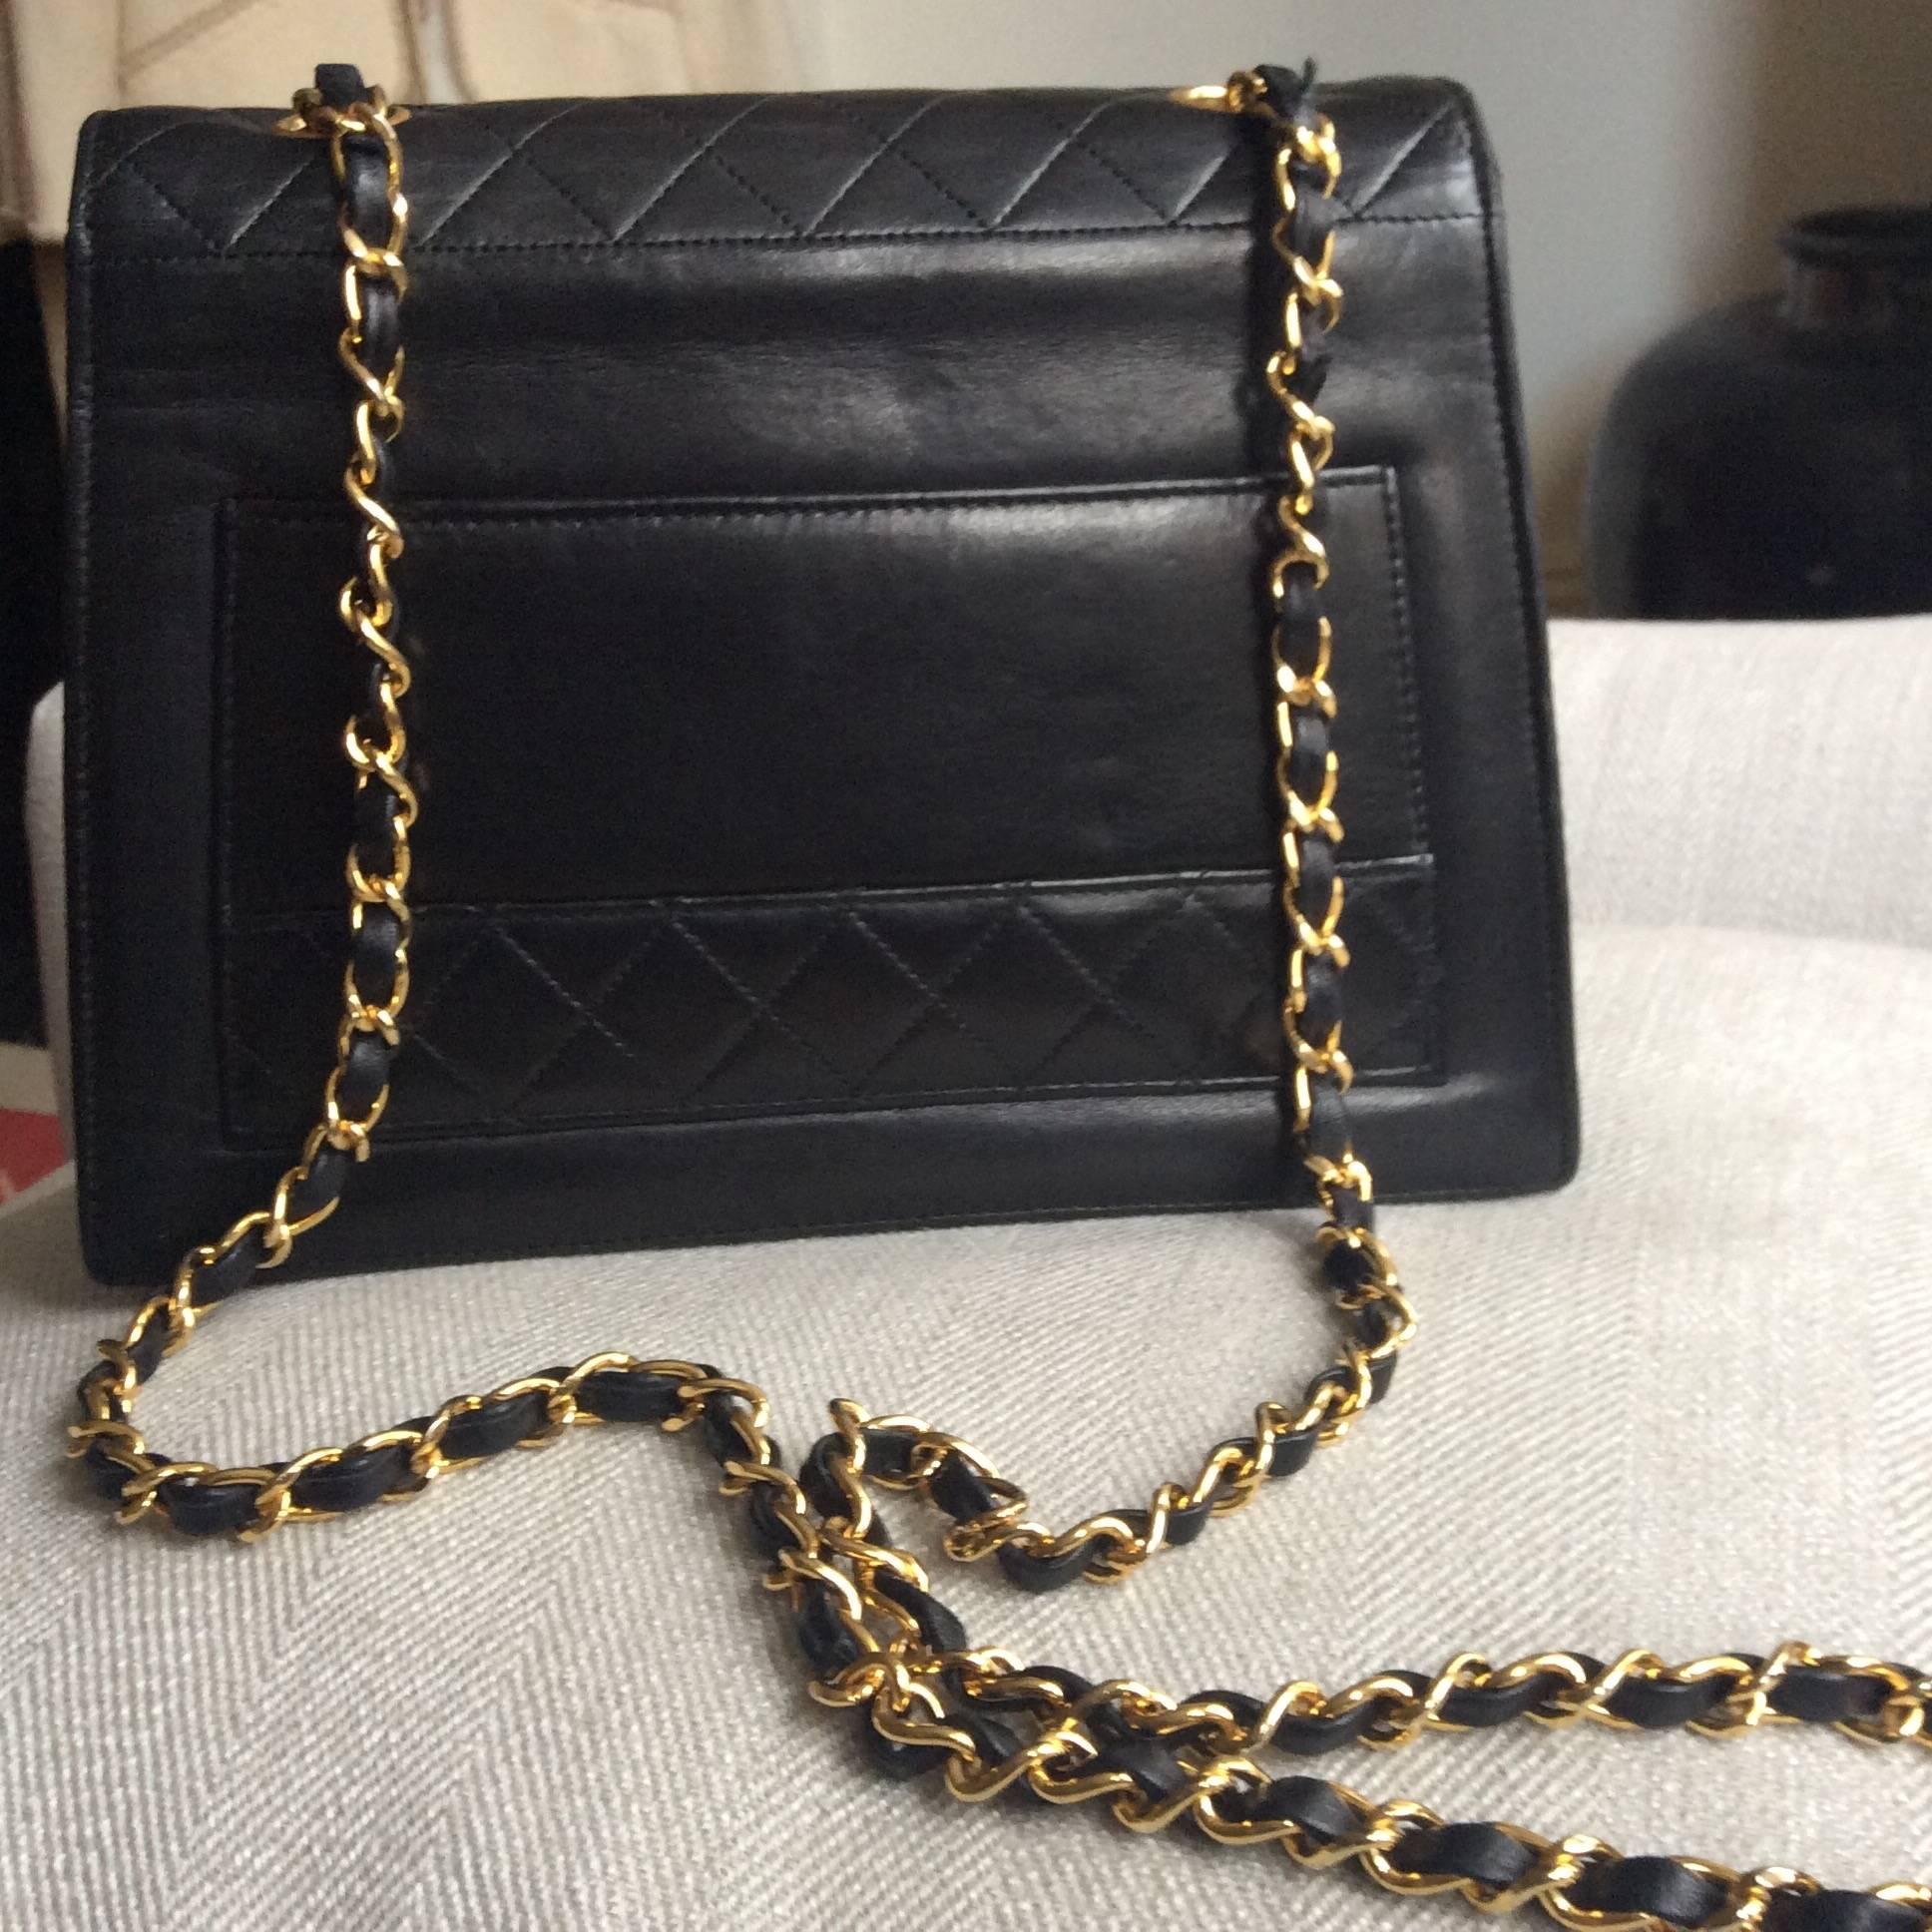 Chanel black lambskin quilted shoulder bag.
Classic Chanel diamond style stitching , turn style lock with Chanel embosed on it.

Dated 1989 to 1991

Serial Number 1635314